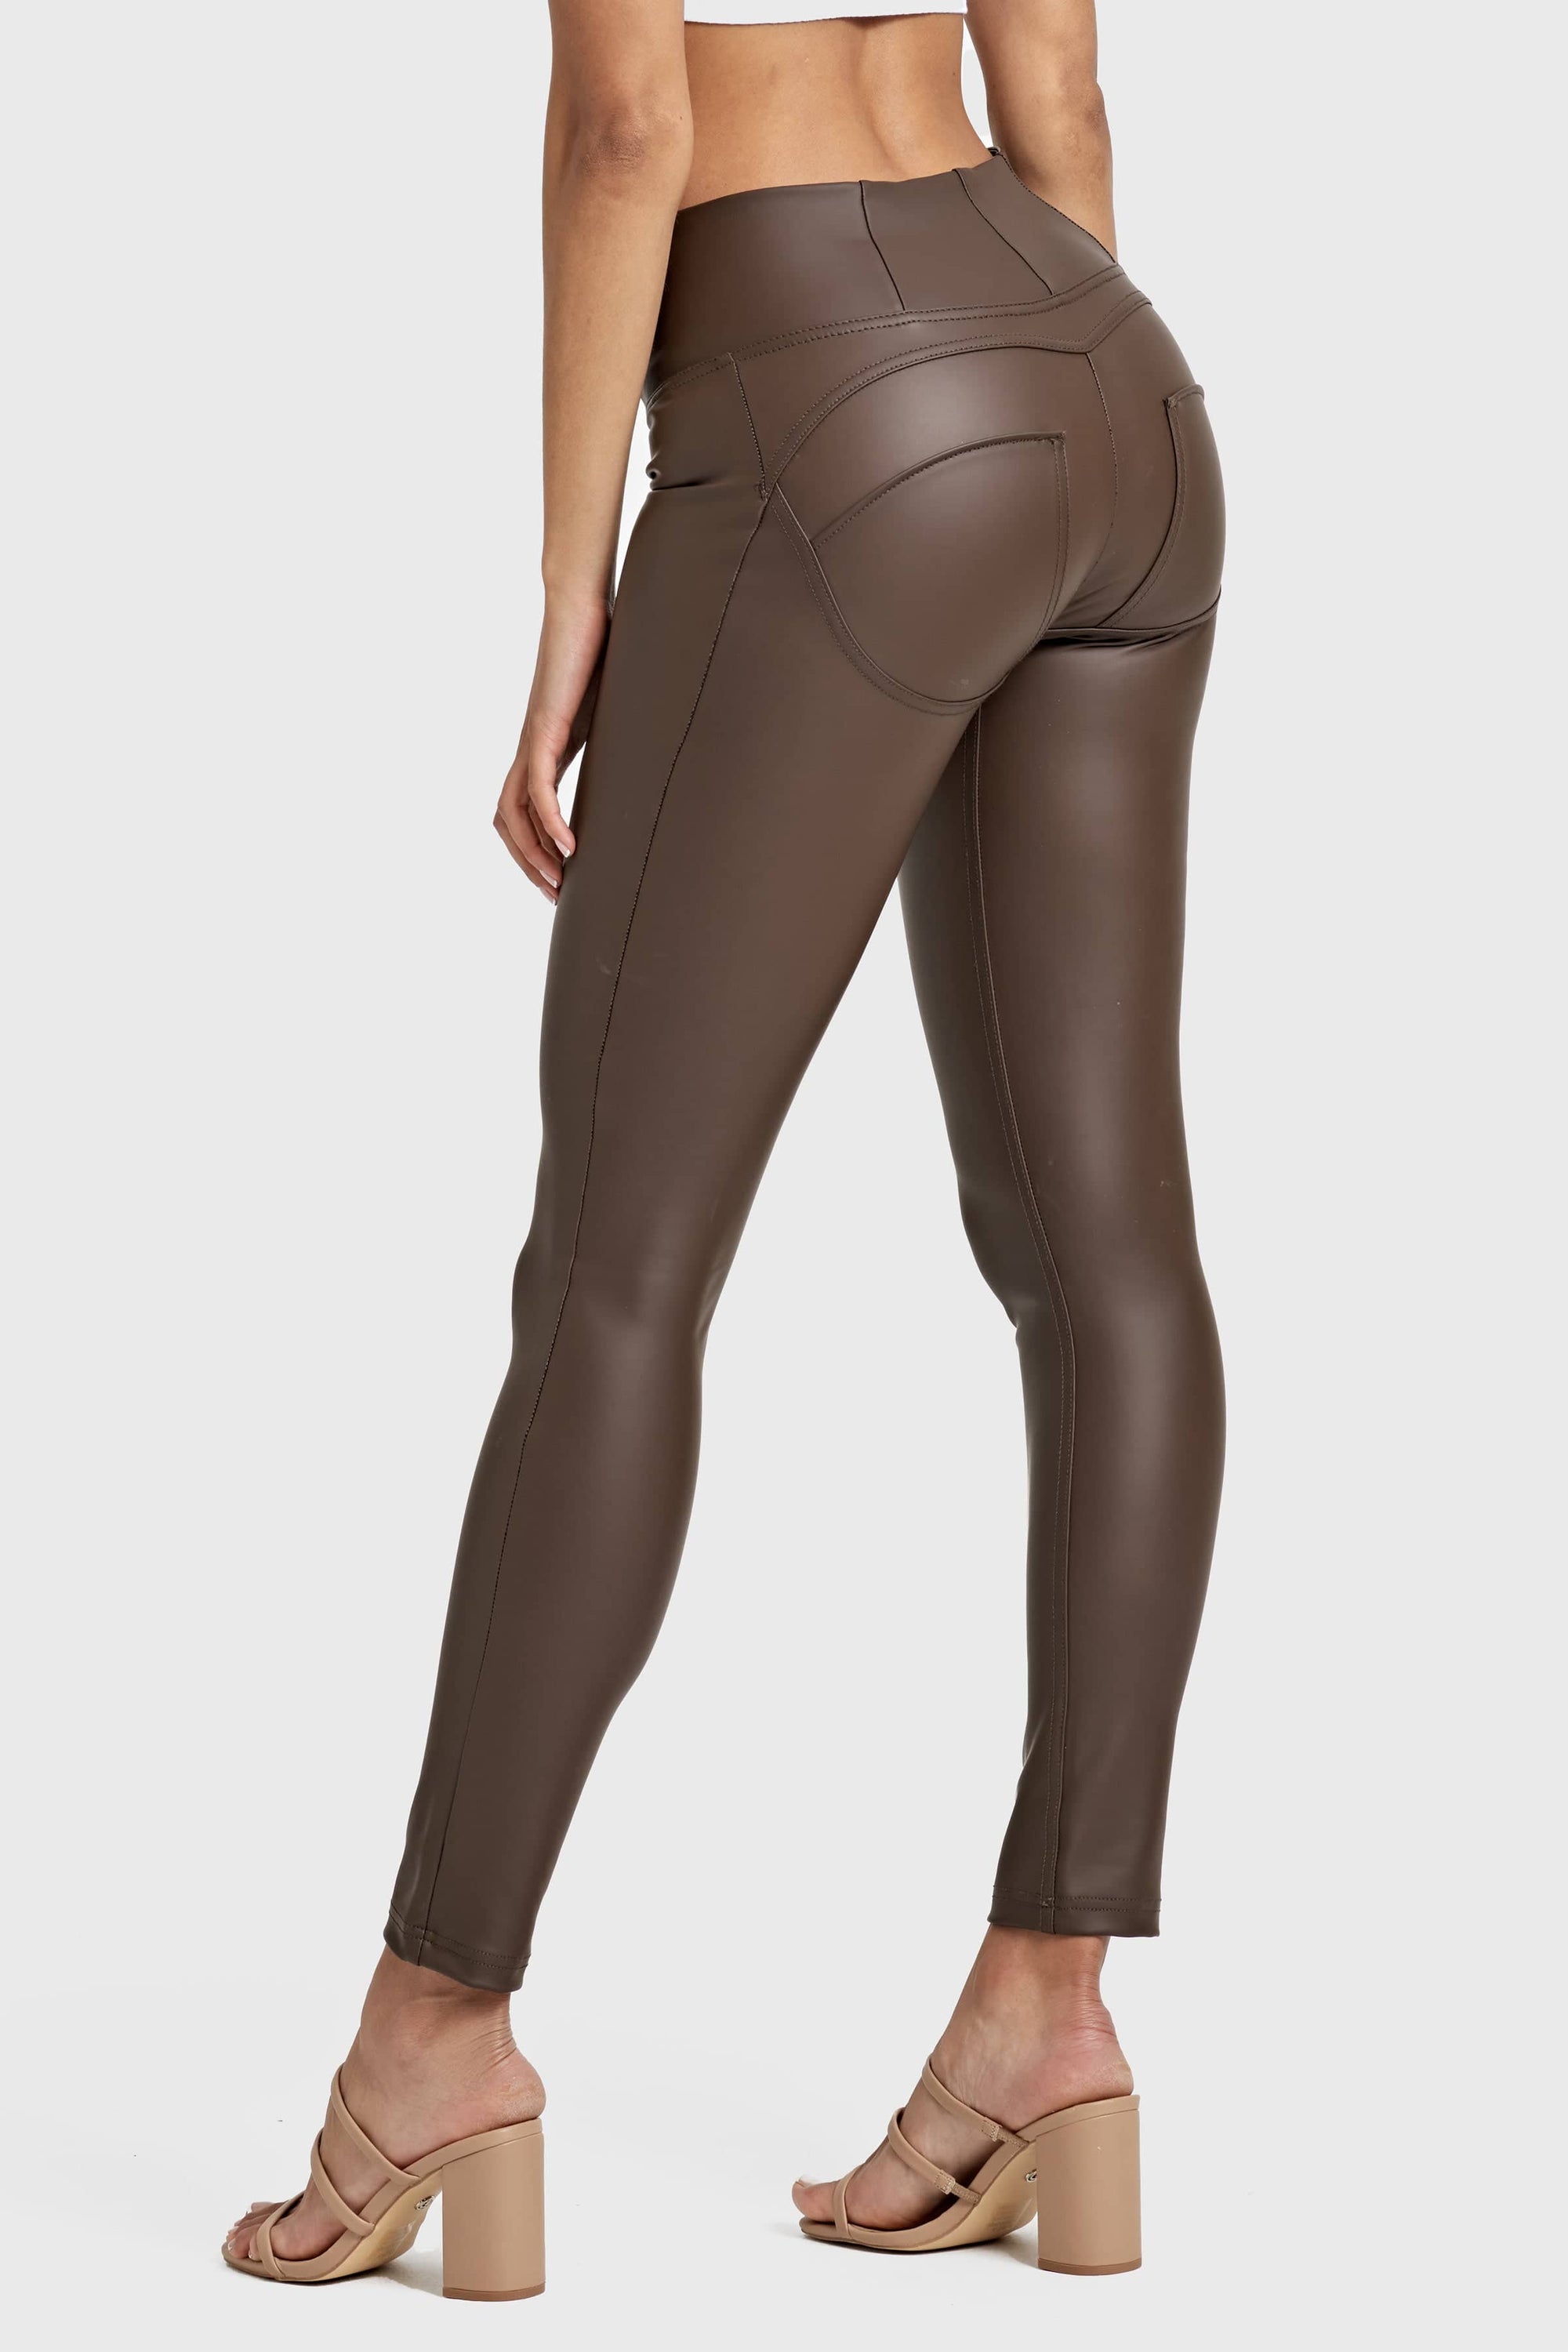 WR.UP® Faux Leather - High Waisted - 7/8 Length - Chocolate 9